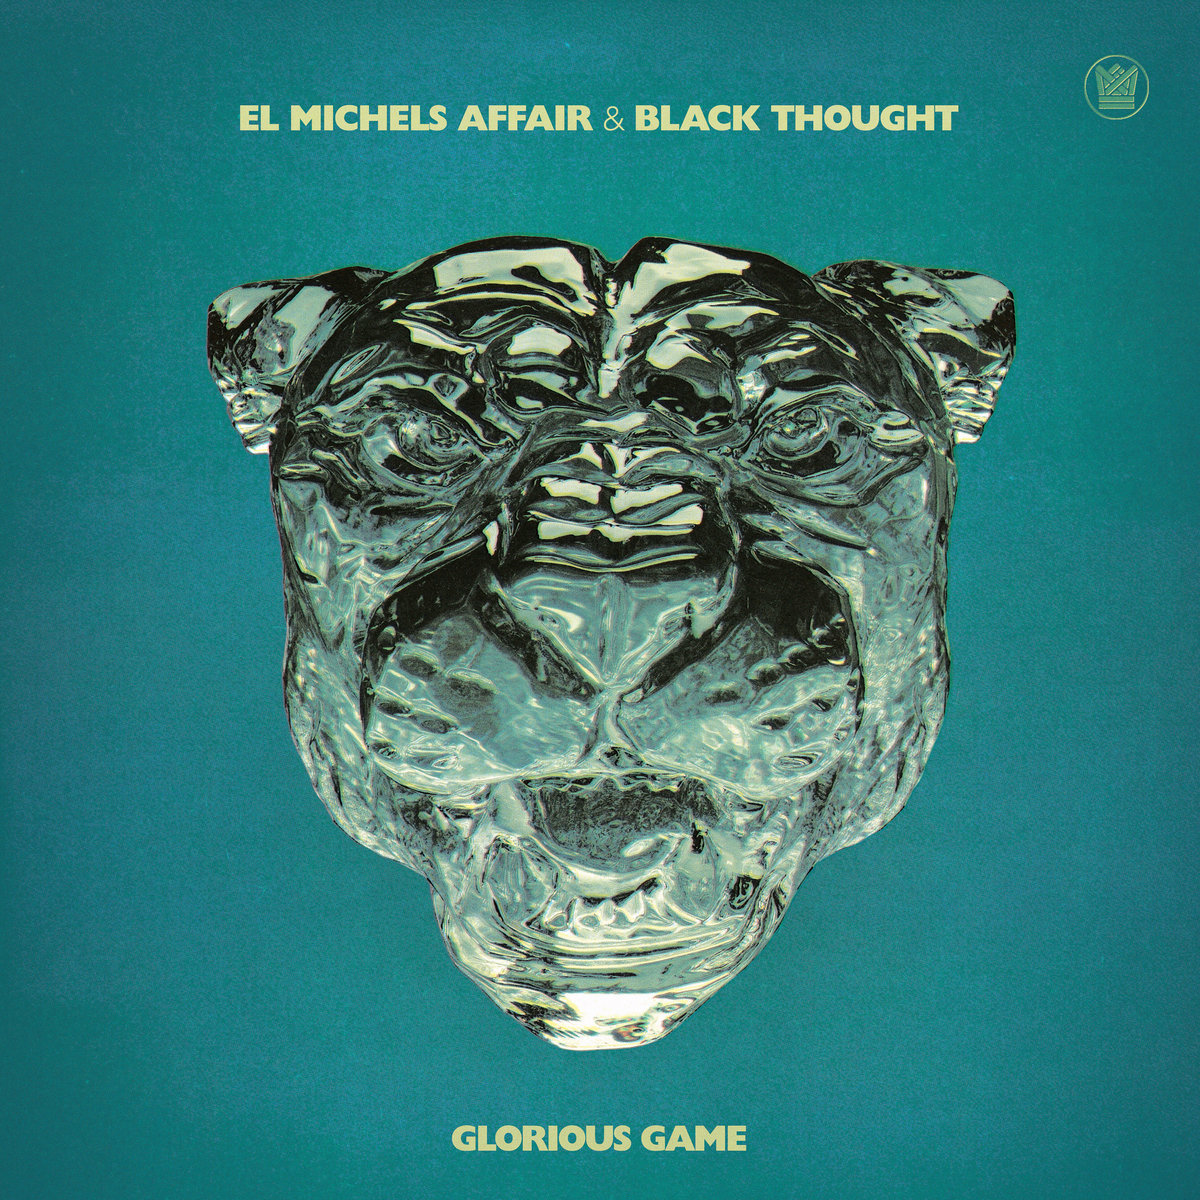 El Michels Affair and Black Thought